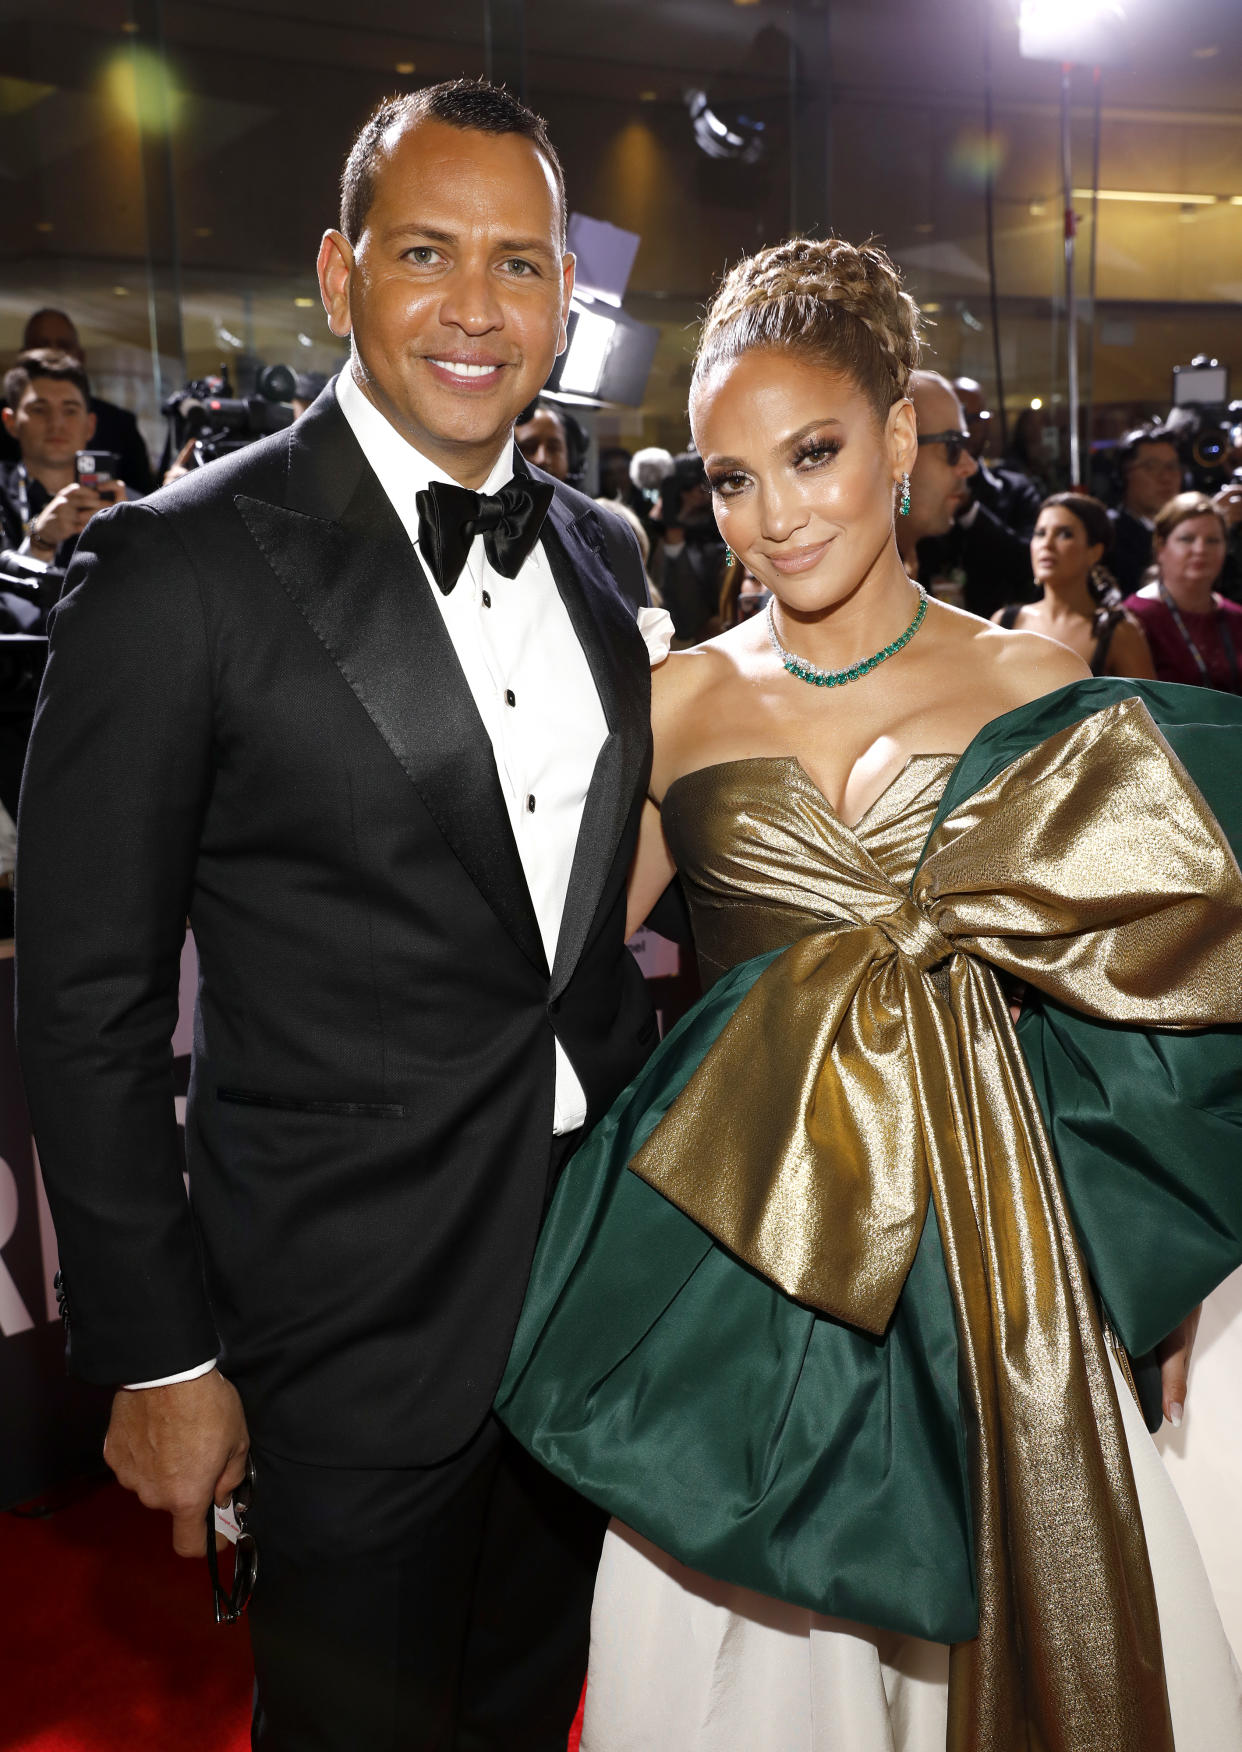 BEVERLY HILLS, CALIFORNIA - JANUARY 05: 77th ANNUAL GOLDEN GLOBE AWARDS -- Pictured: (l-r) Alex Rodriguez and Jennifer Lopez arrive to the 77th Annual Golden Globe Awards held at the Beverly Hilton Hotel on January 5, 2020. -- (Photo by Trae Patton/NBC/NBCU Photo Bank via Getty Images)